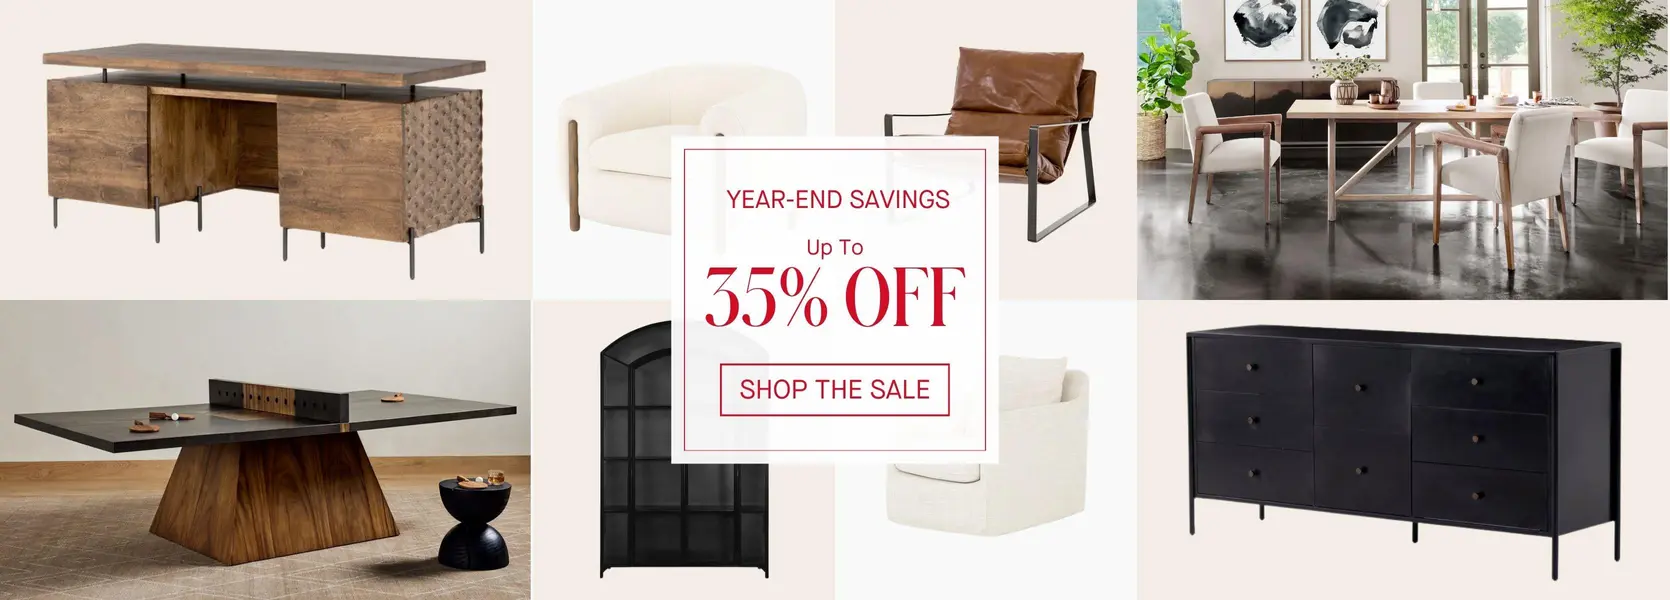 Four Hands Year End Sale